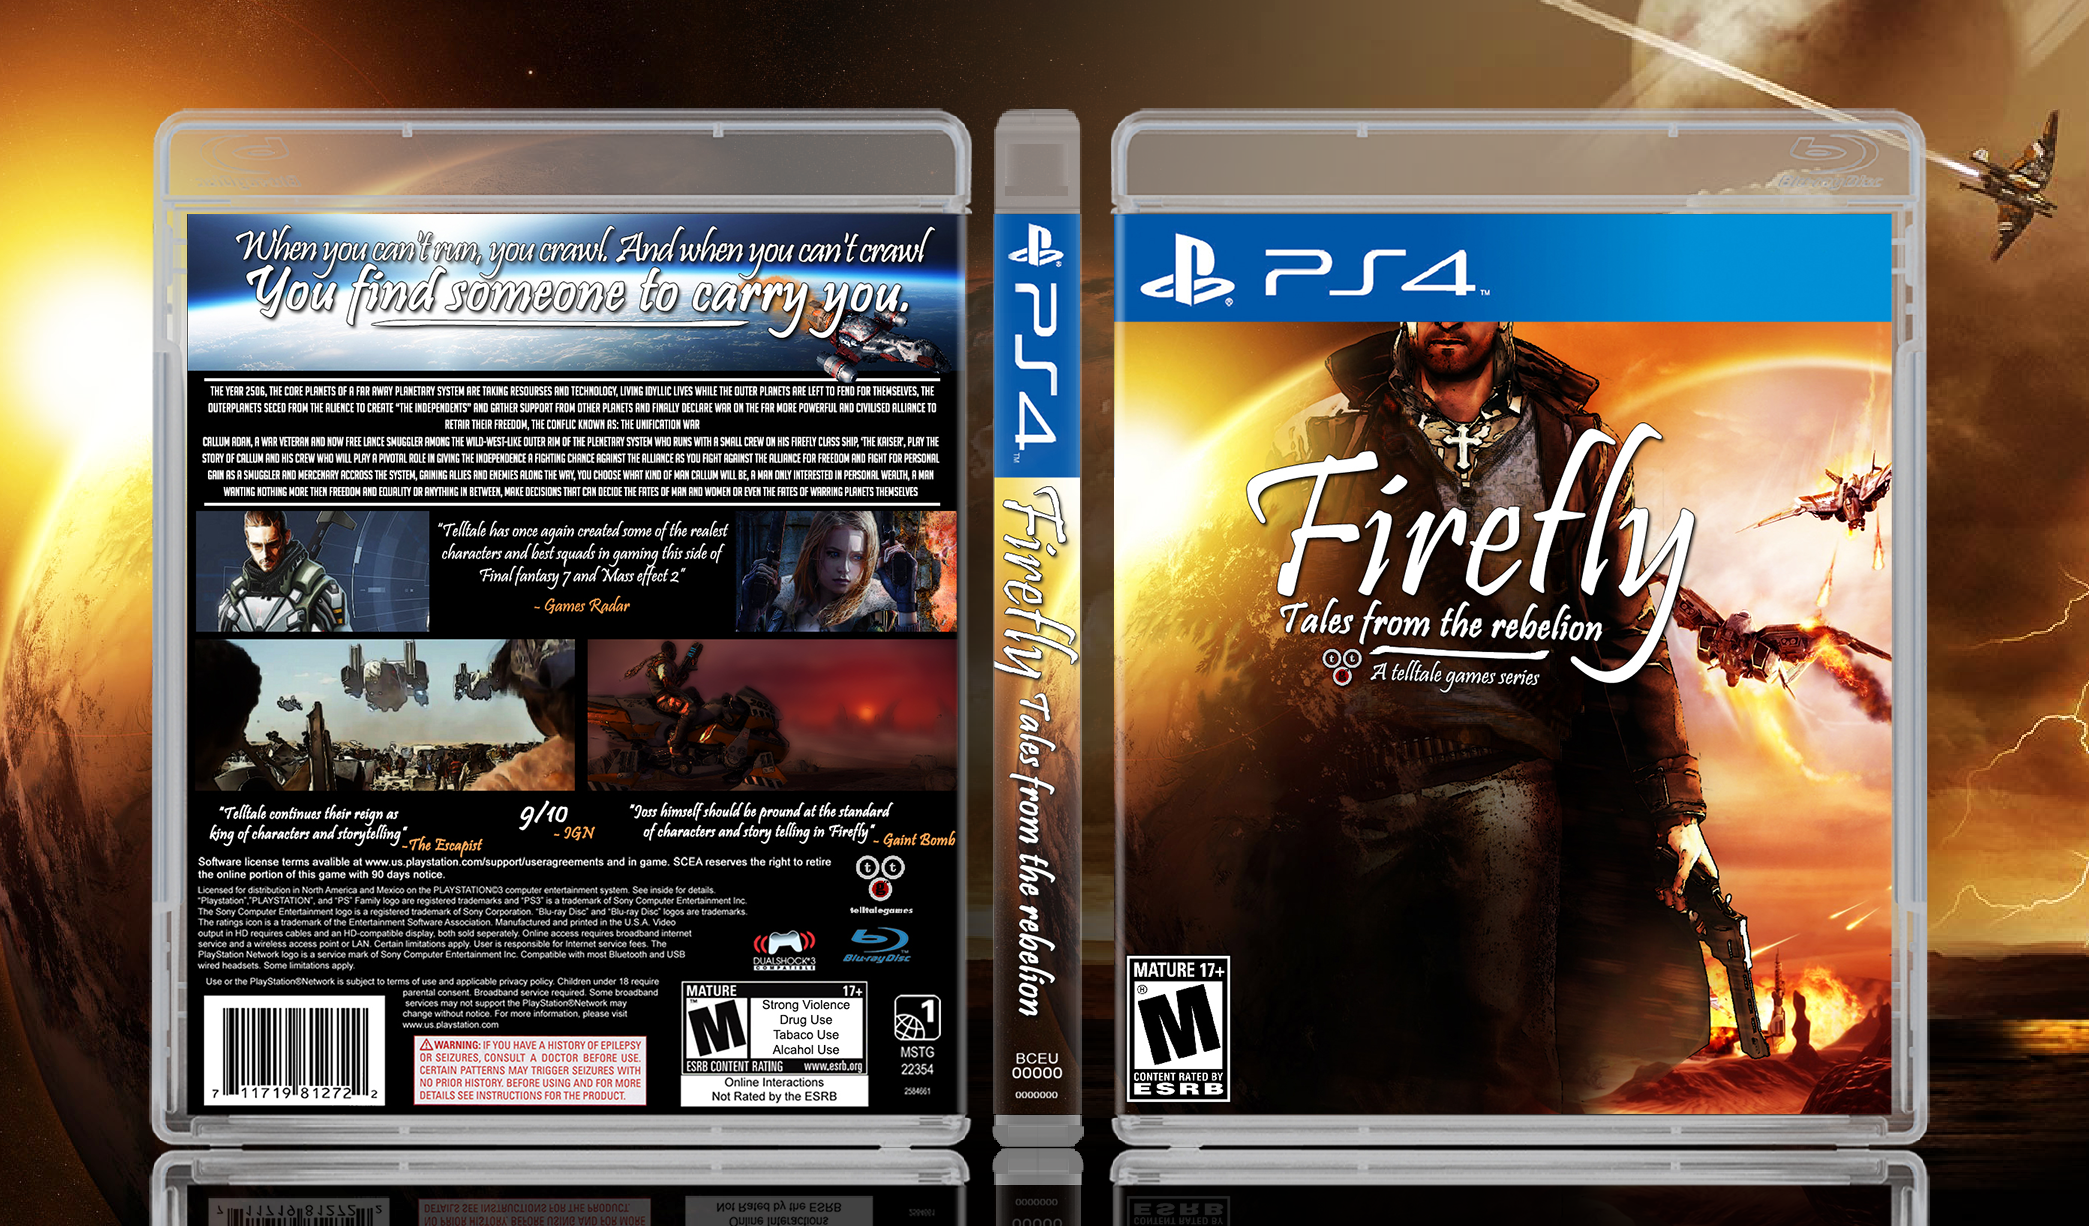 Firefly: Tales from the Rebellion box cover